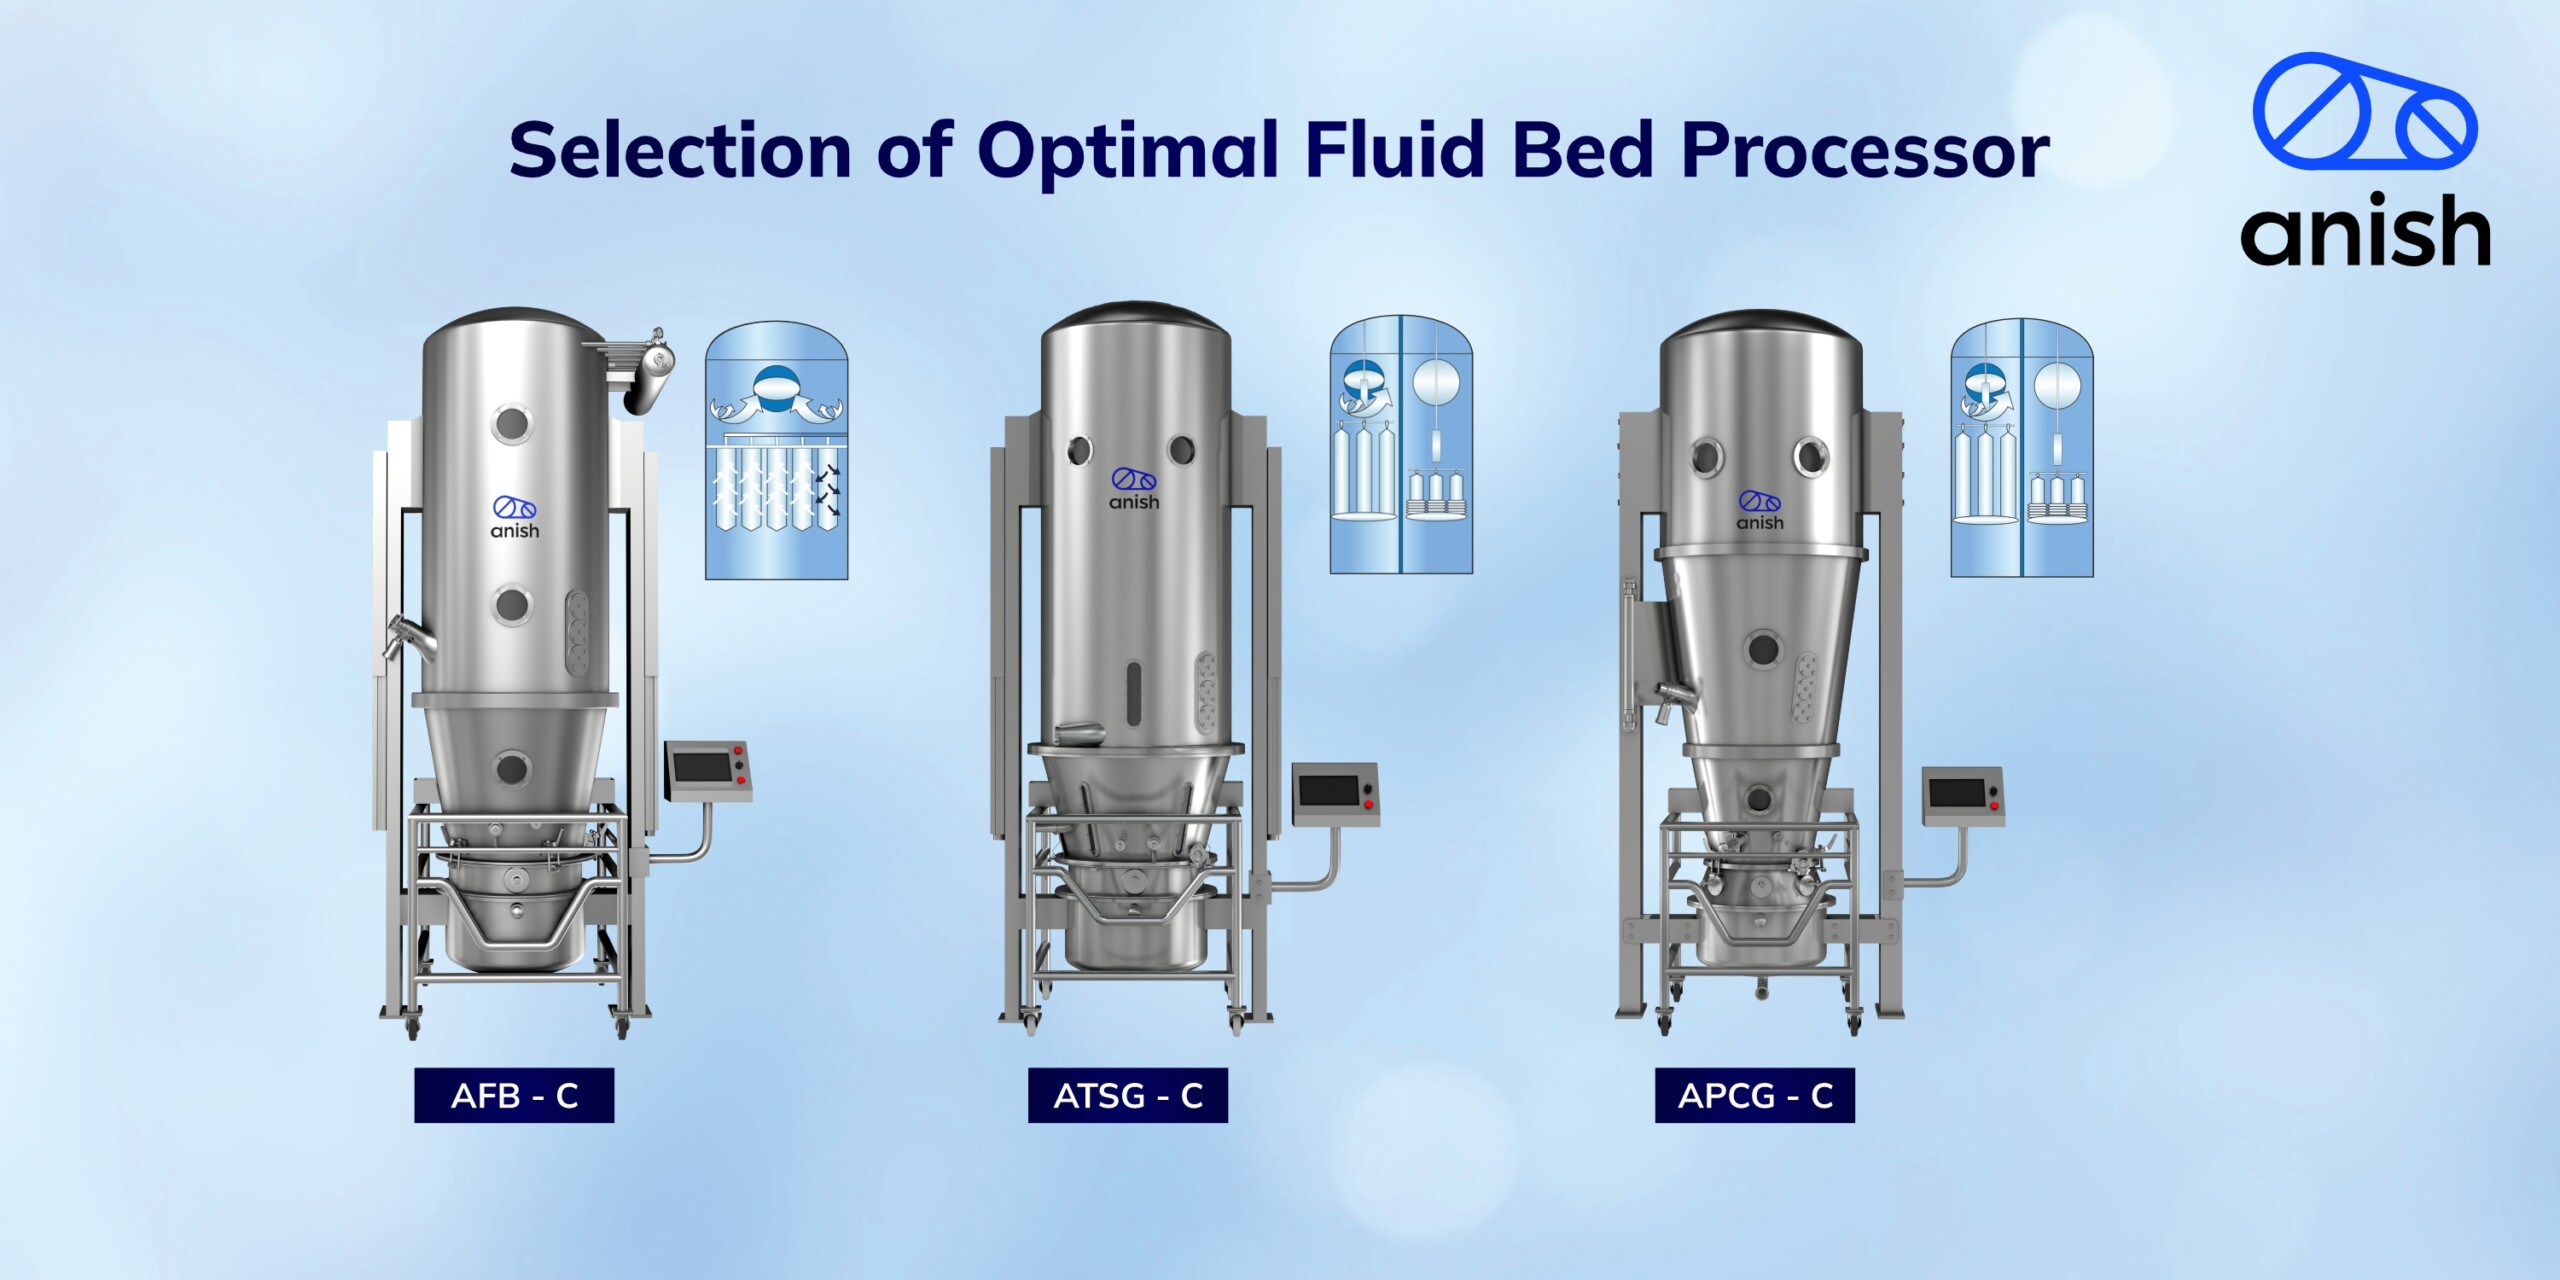 Guide to Optimal Fluid Bed Processor Selection